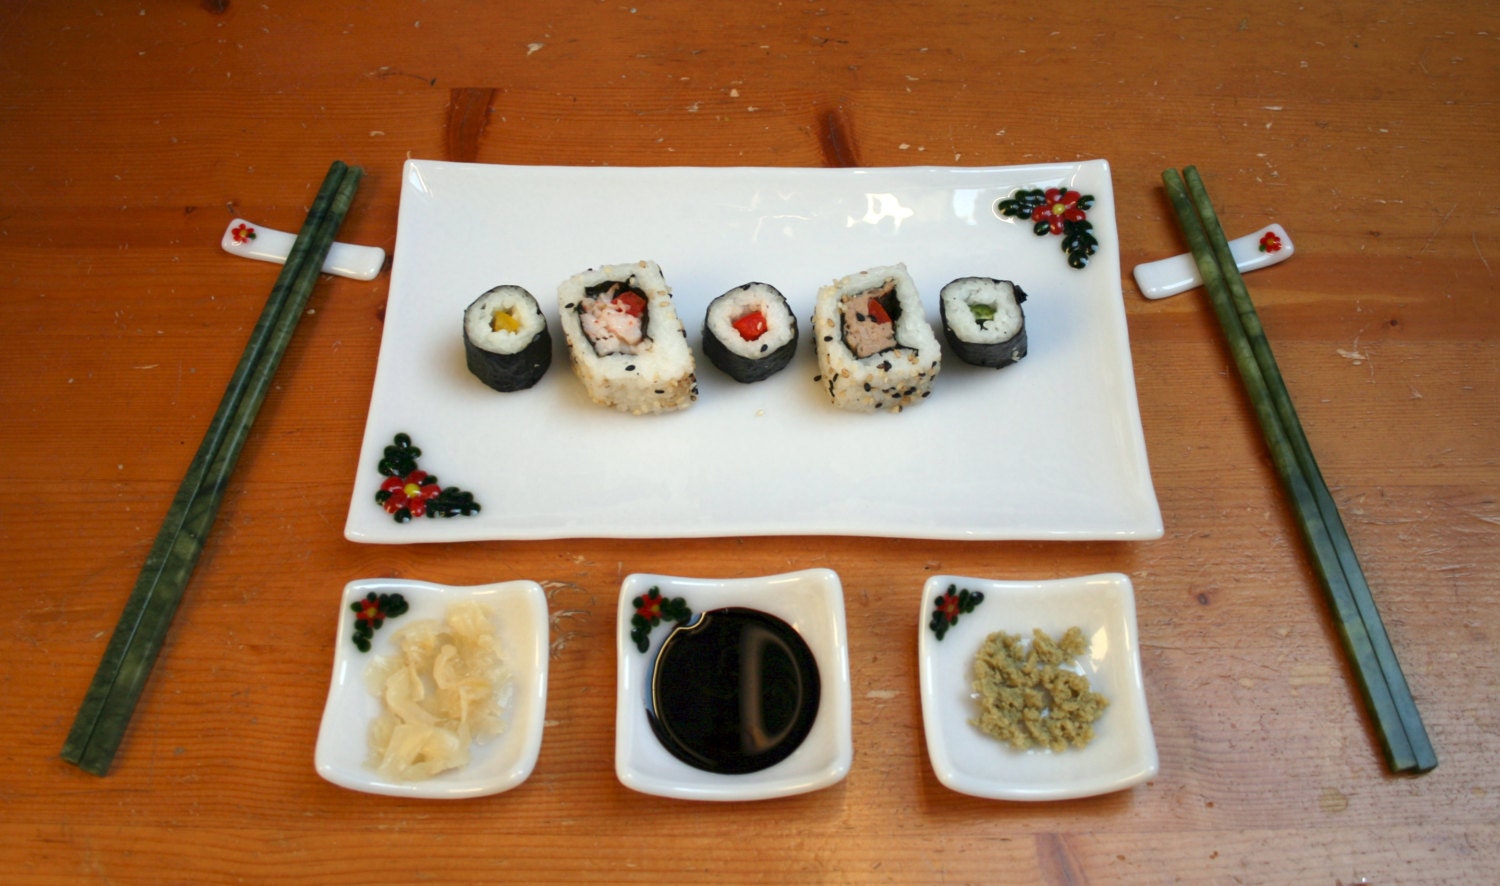 Fused glass Sushi set 'Flora in Red' 6 or 8 piece large serving